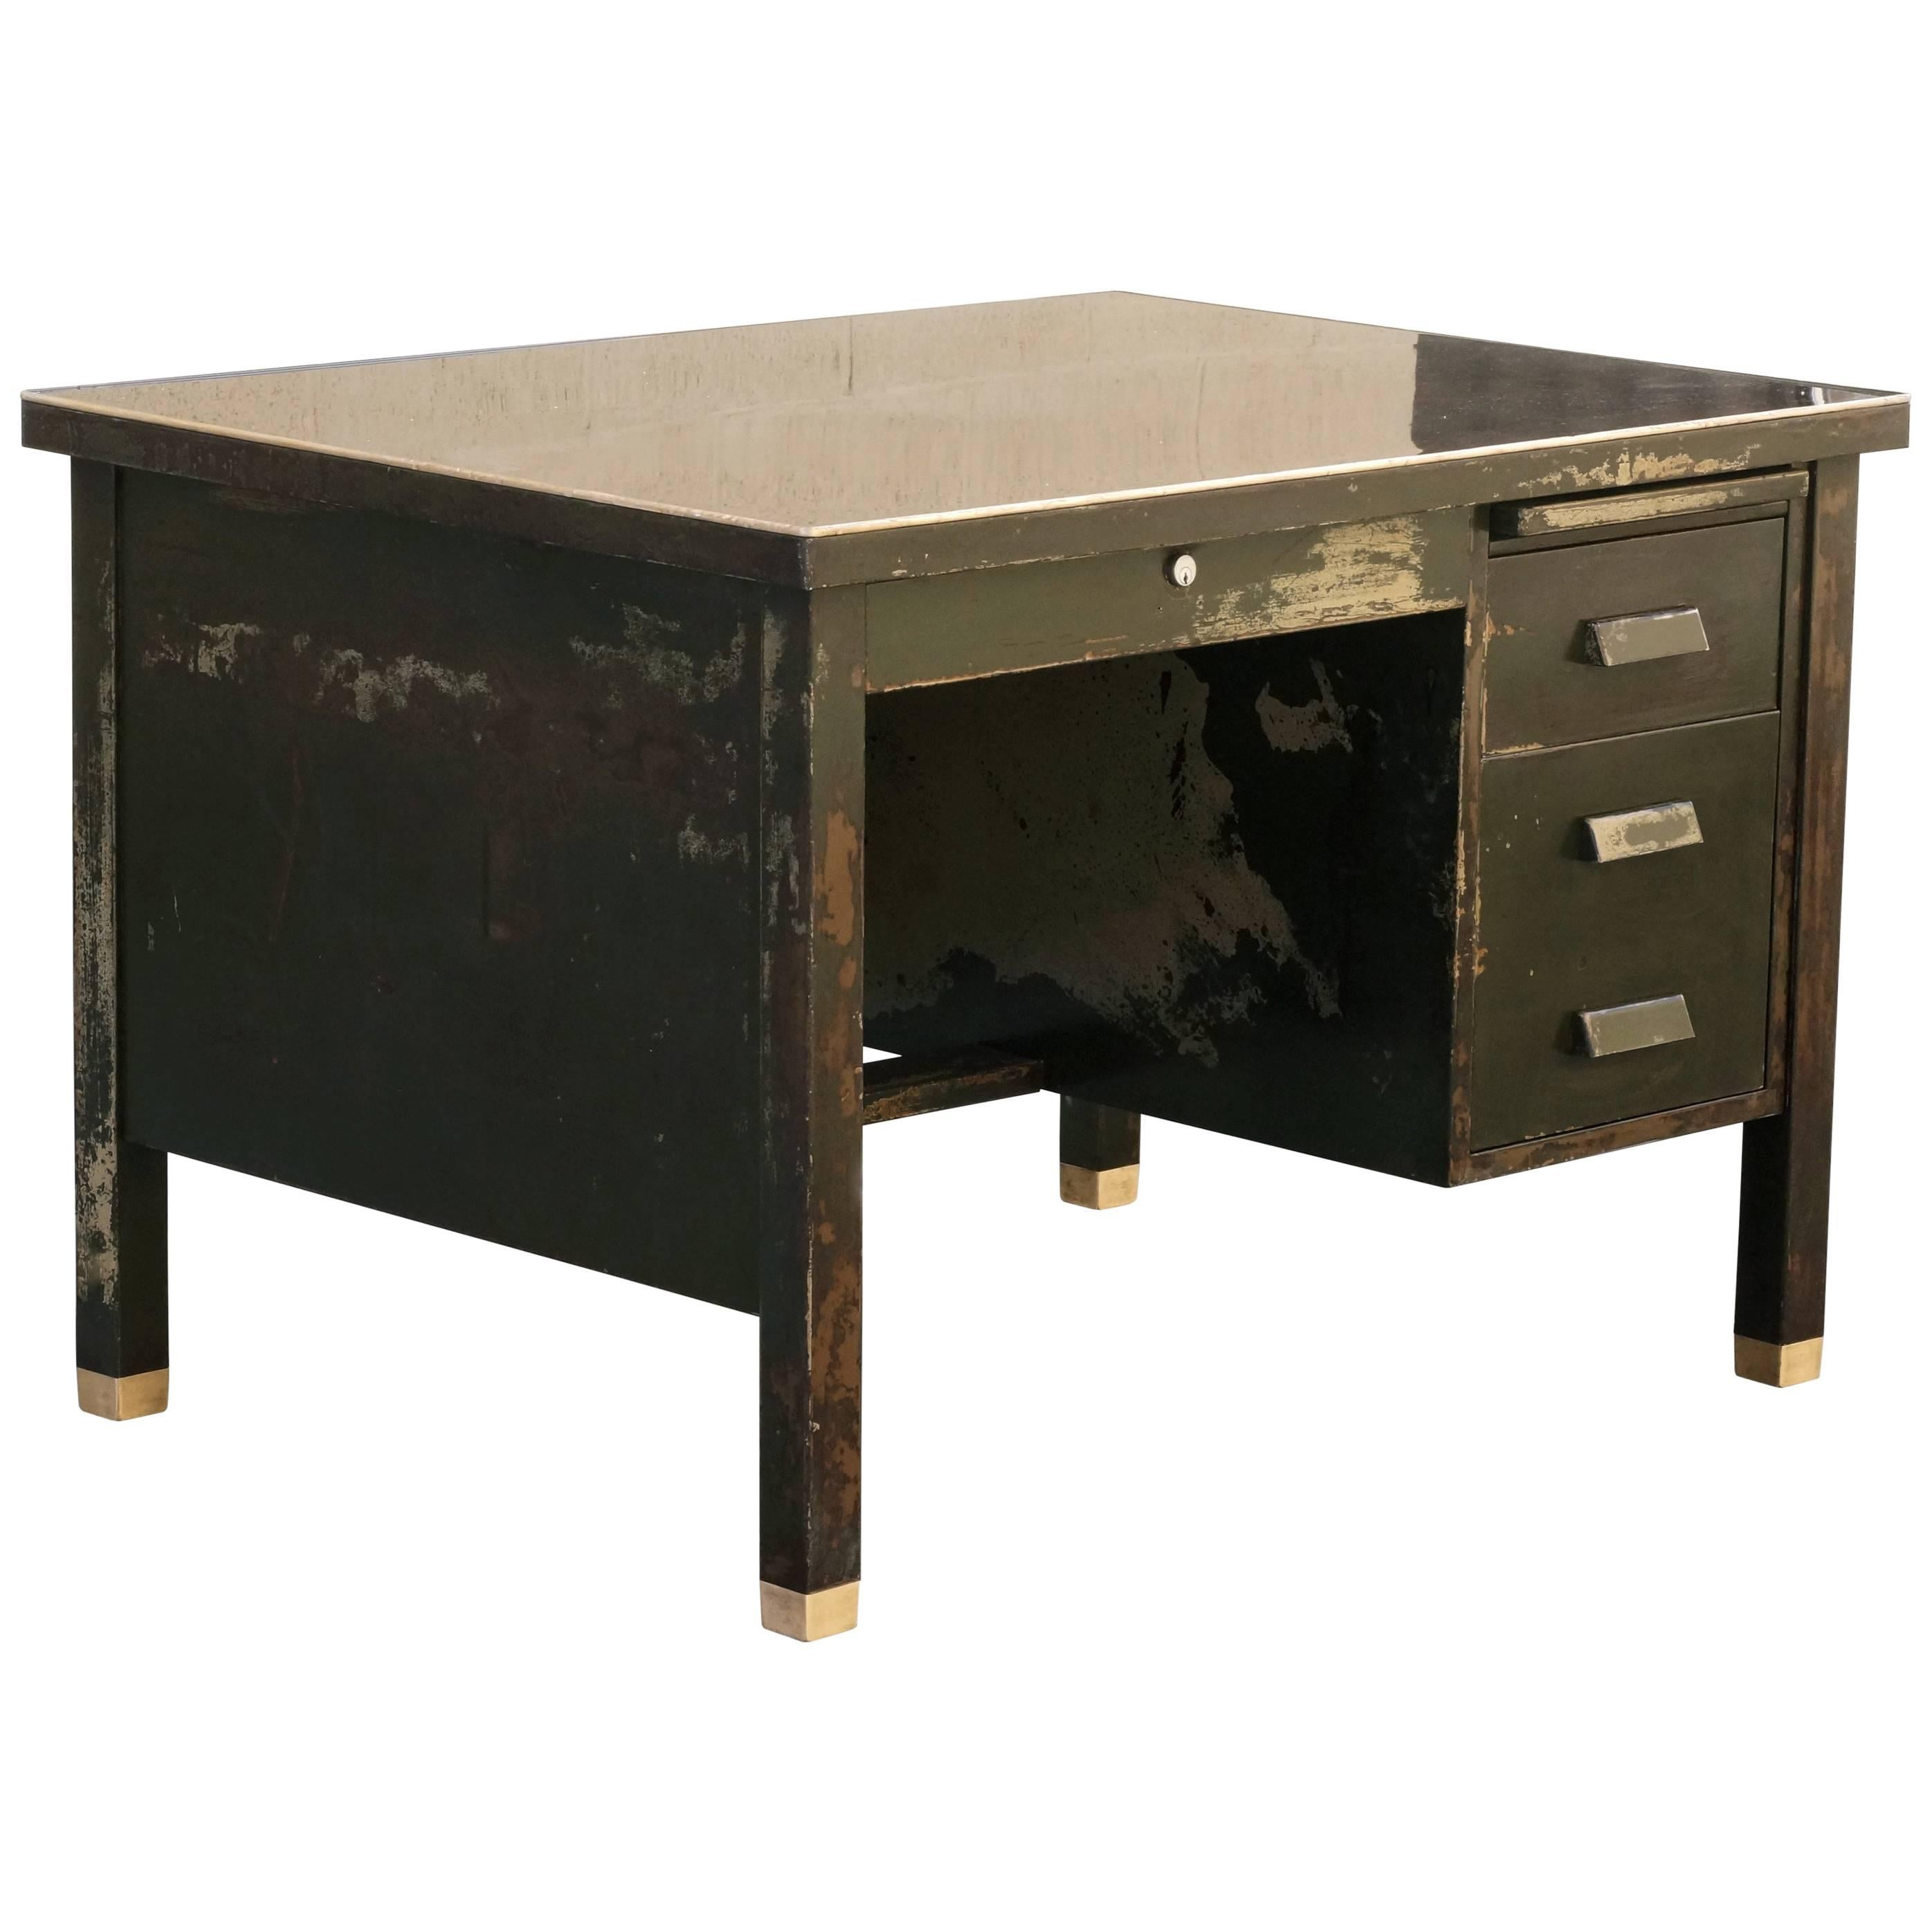 1920s General Fireproofing Tanker Desk with Distressed Patina